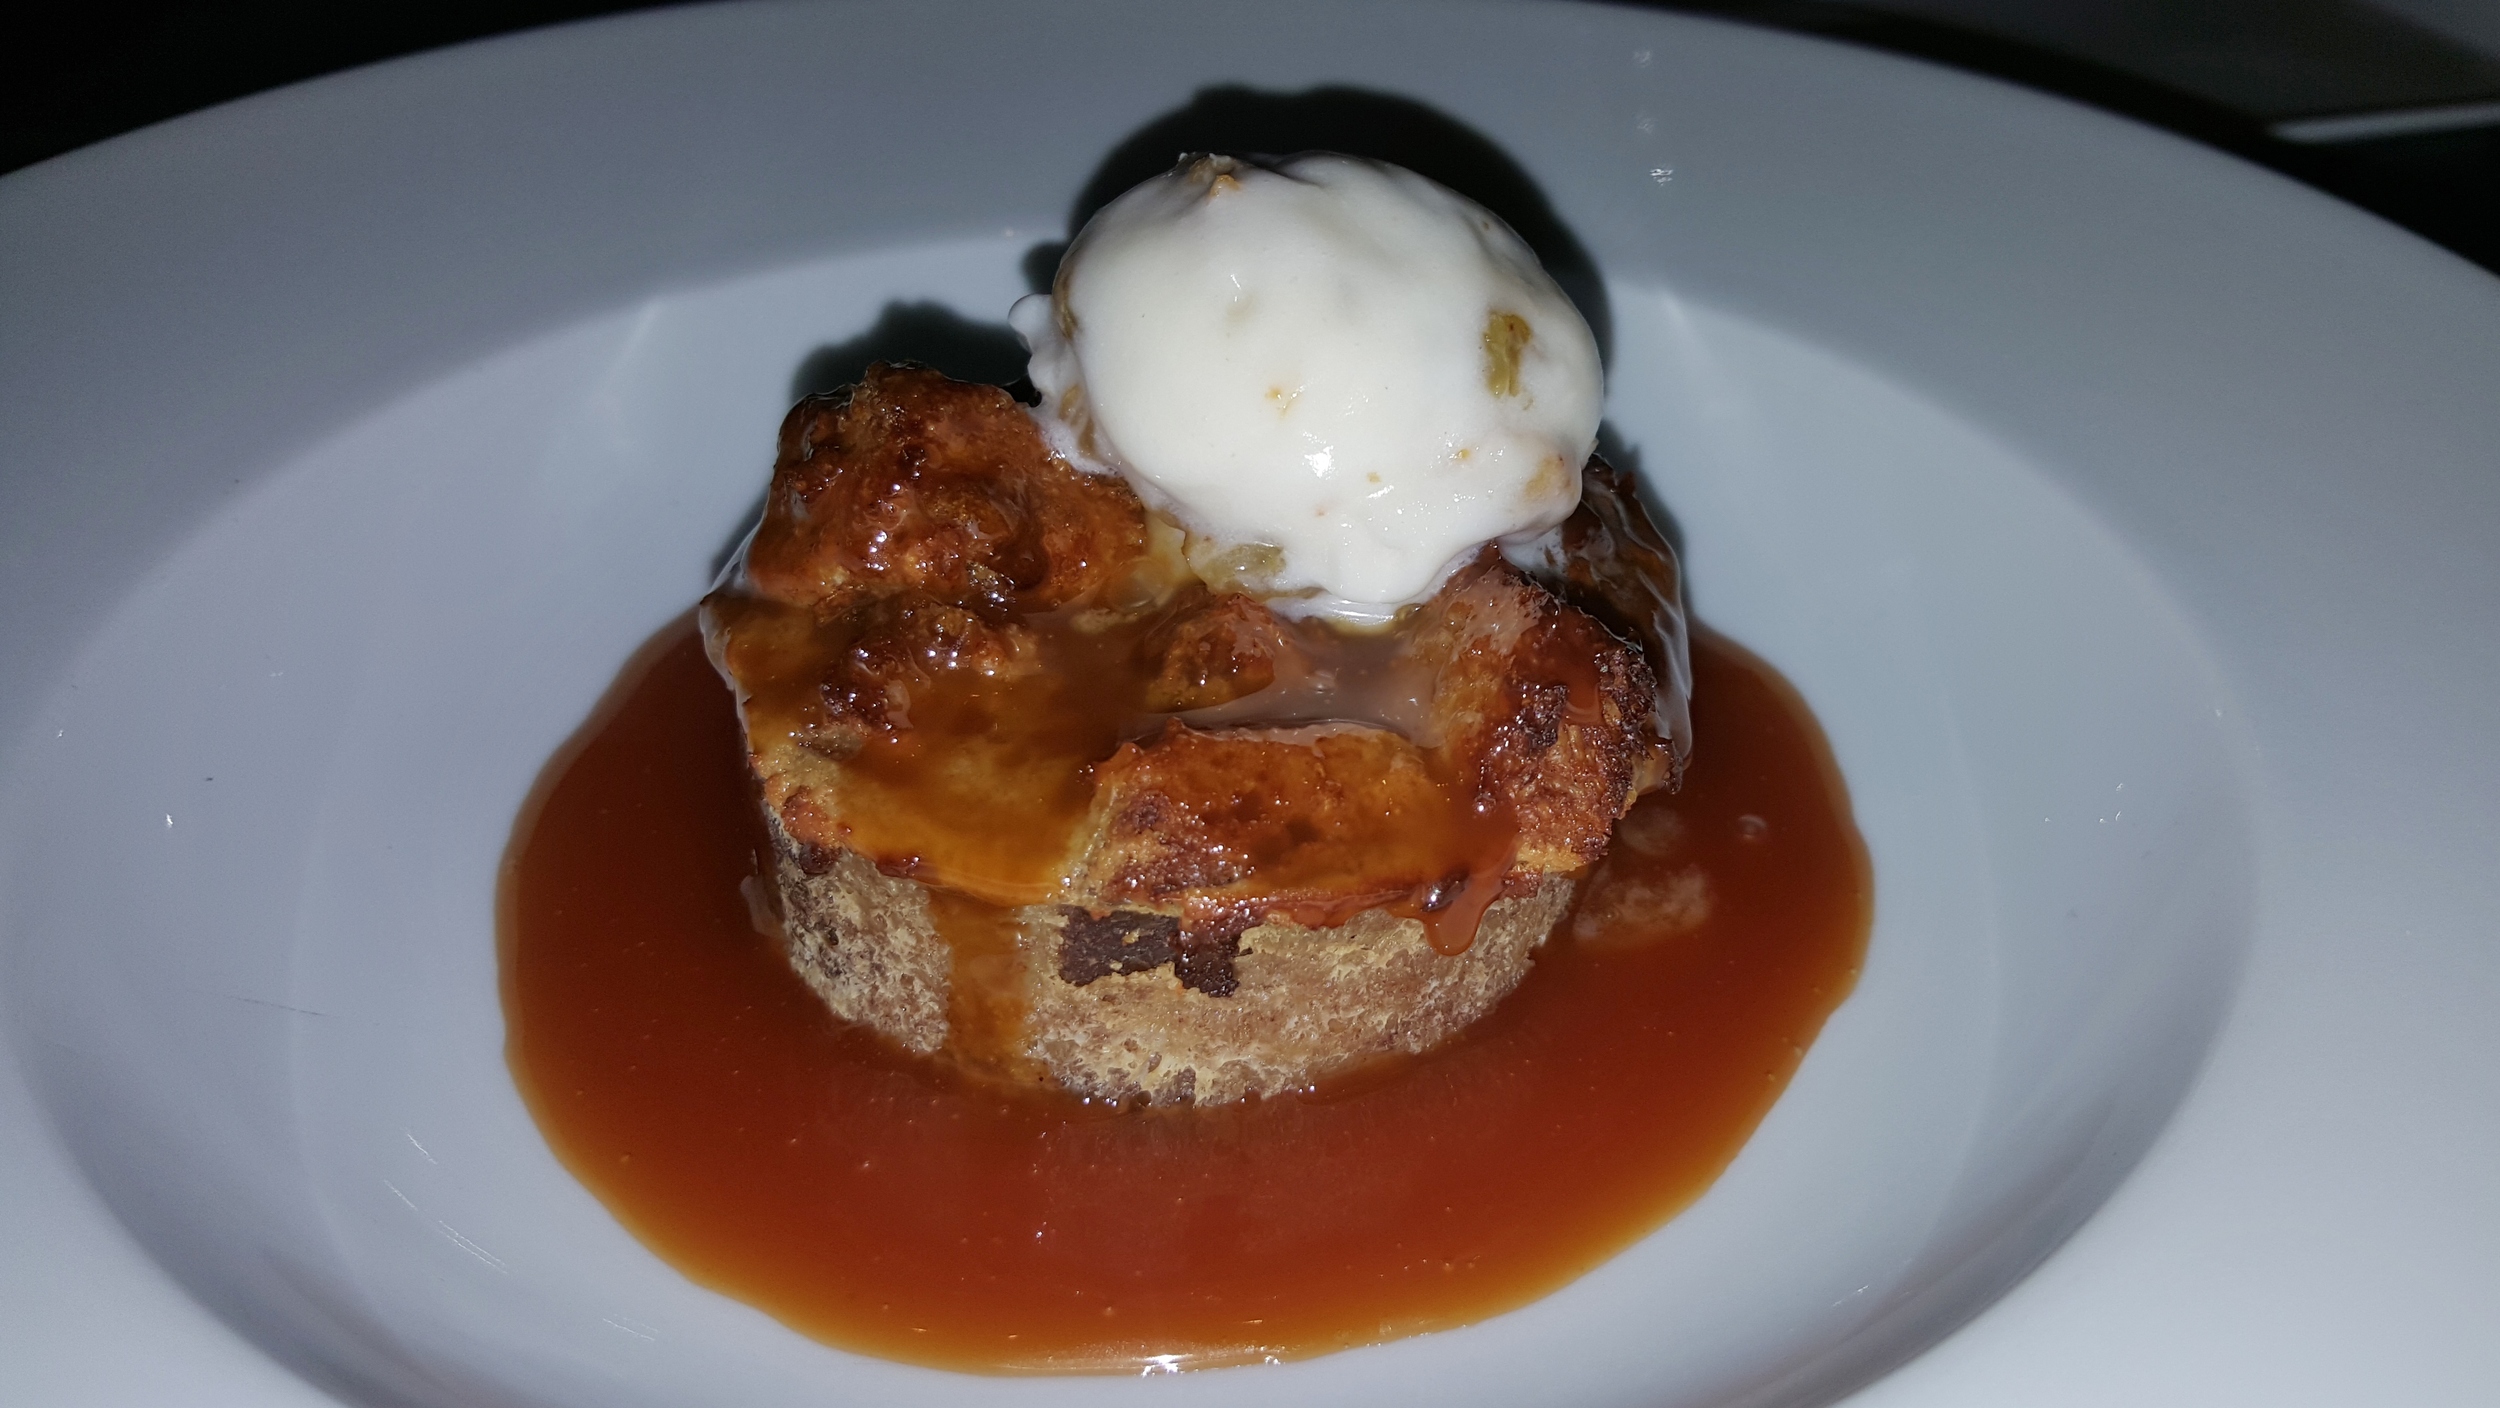 Sticky toffee cake with caramel sauce and frozen yogurt 